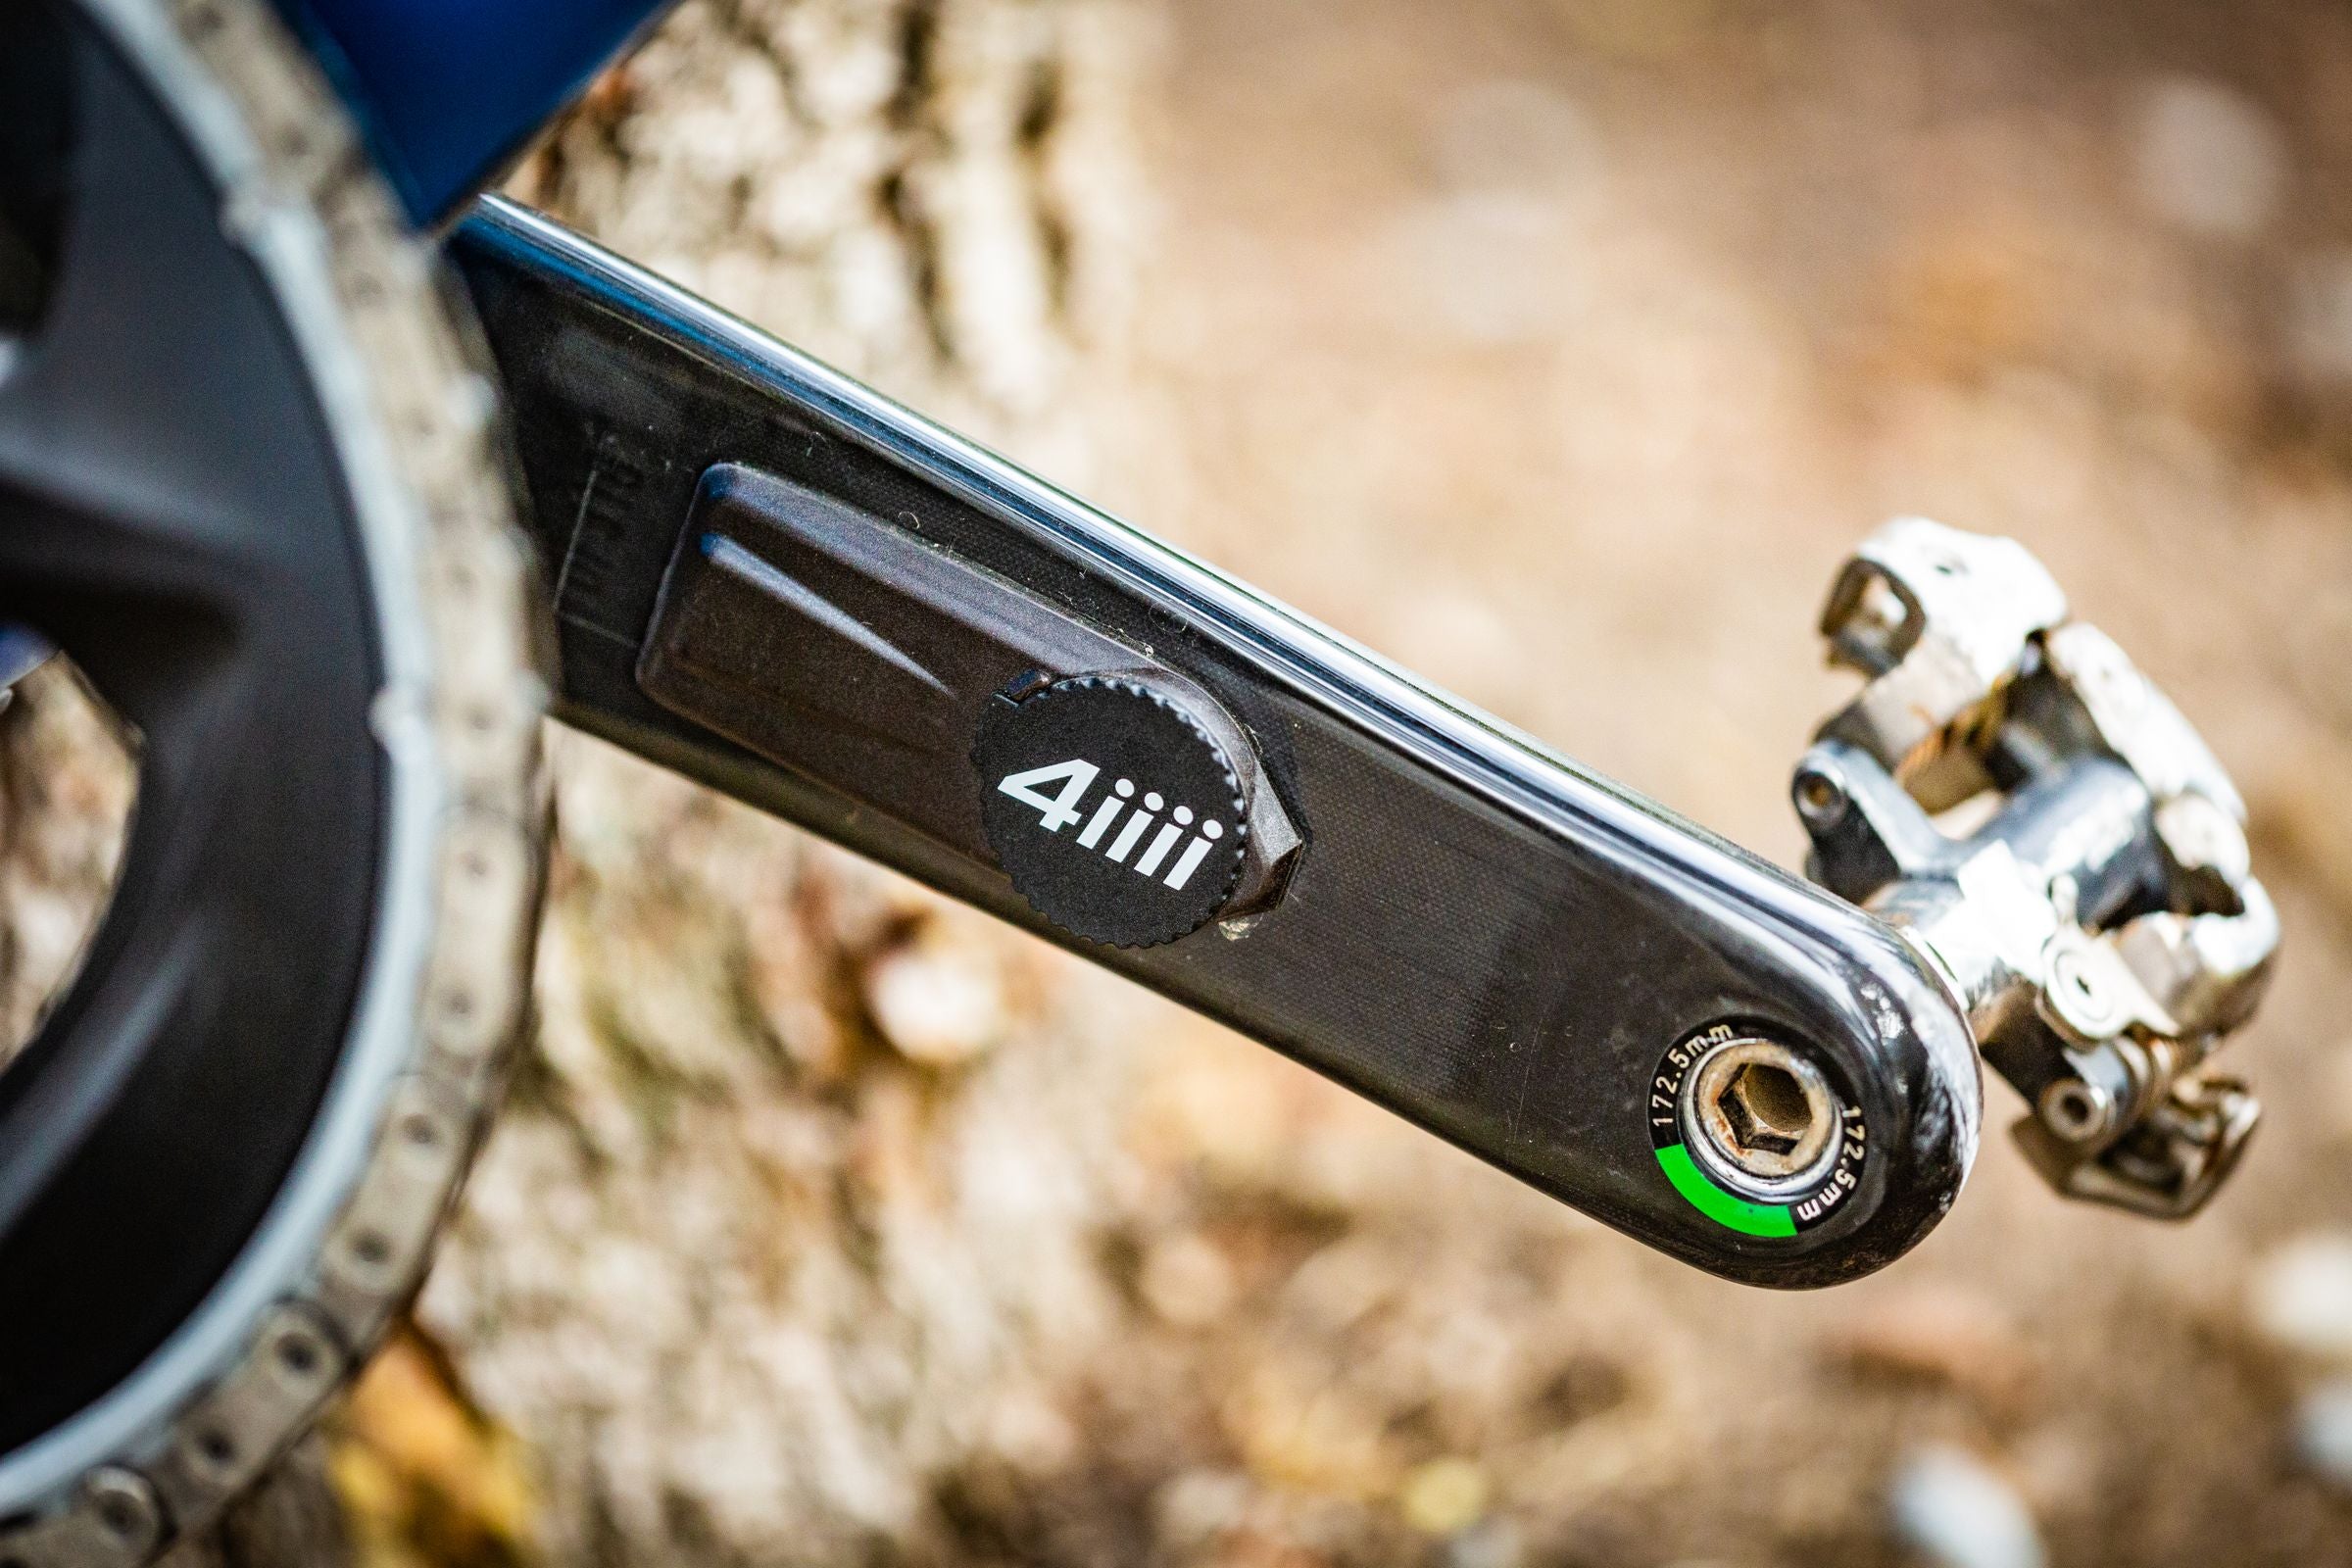 4iiii Precision Pro Power meter (Add-On) | Strictly Bicycles